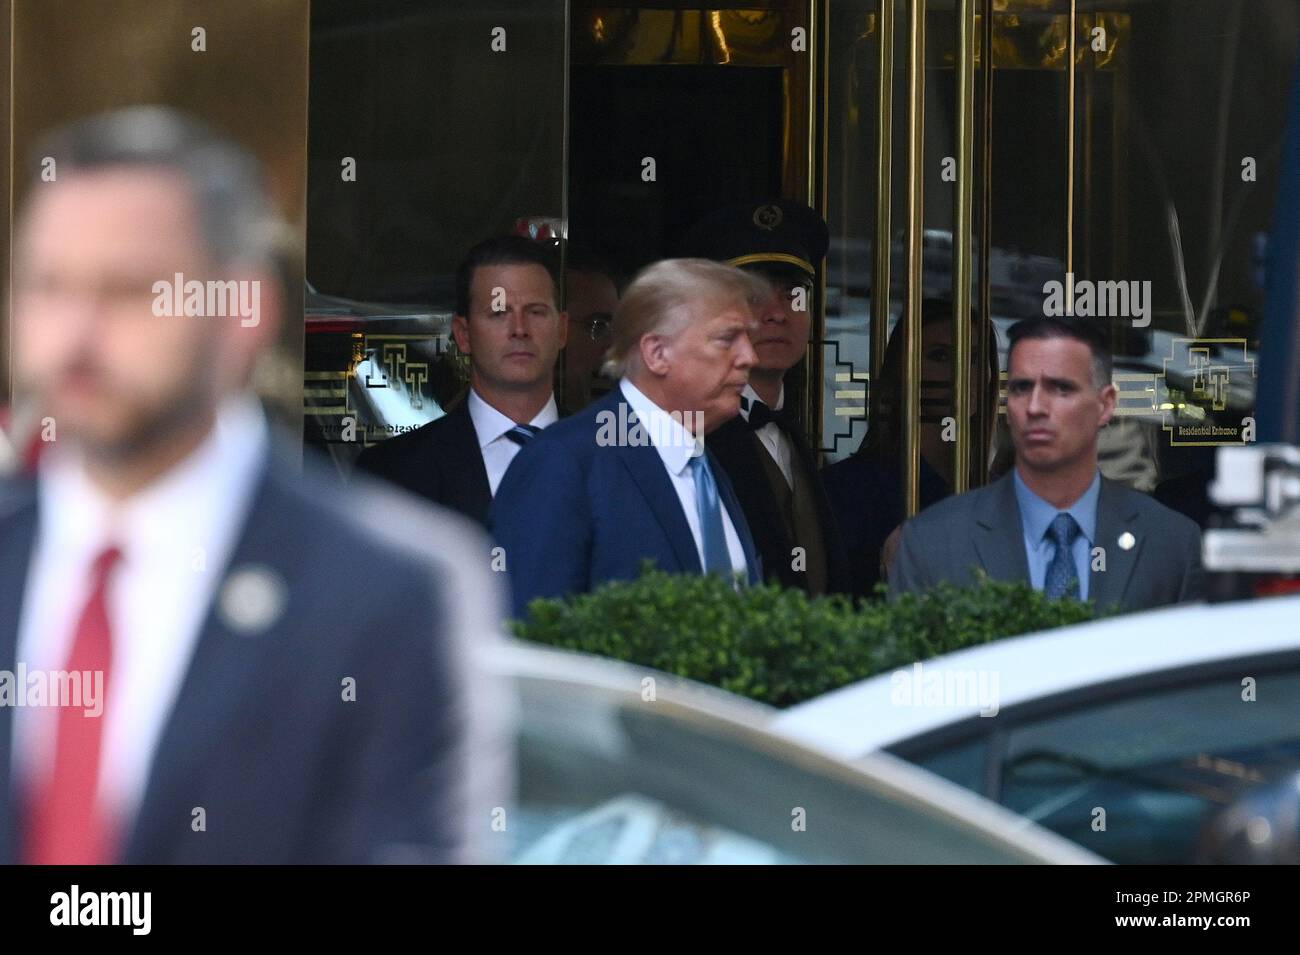 Former U.S. President Donald Trump seen leaving his residence for a deposition hearing with New York State Attorney General Letitia James, New York, NY, April 13, 2023.  The scheduled deposition in a business fraud lawsuit filed by New York State Attorney General is separate from the criminal case involving hush-money payments made during his 2106 Presidential campaign. (Photo by Anthony Behar/Sipa USA) Stock Photo